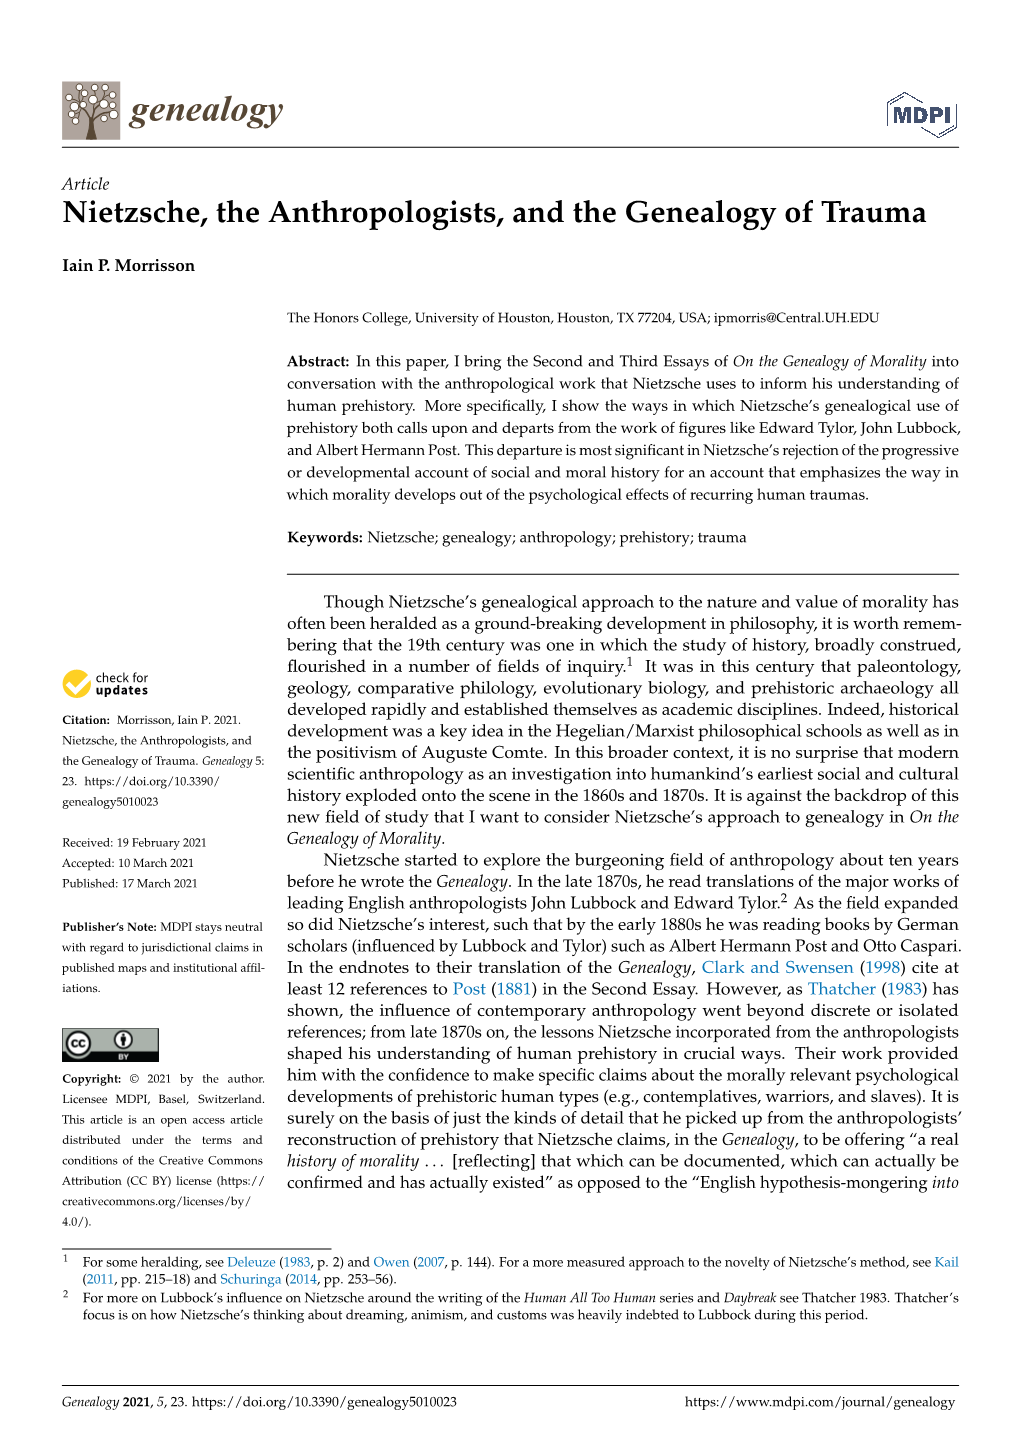 Nietzsche, the Anthropologists, and the Genealogy of Trauma